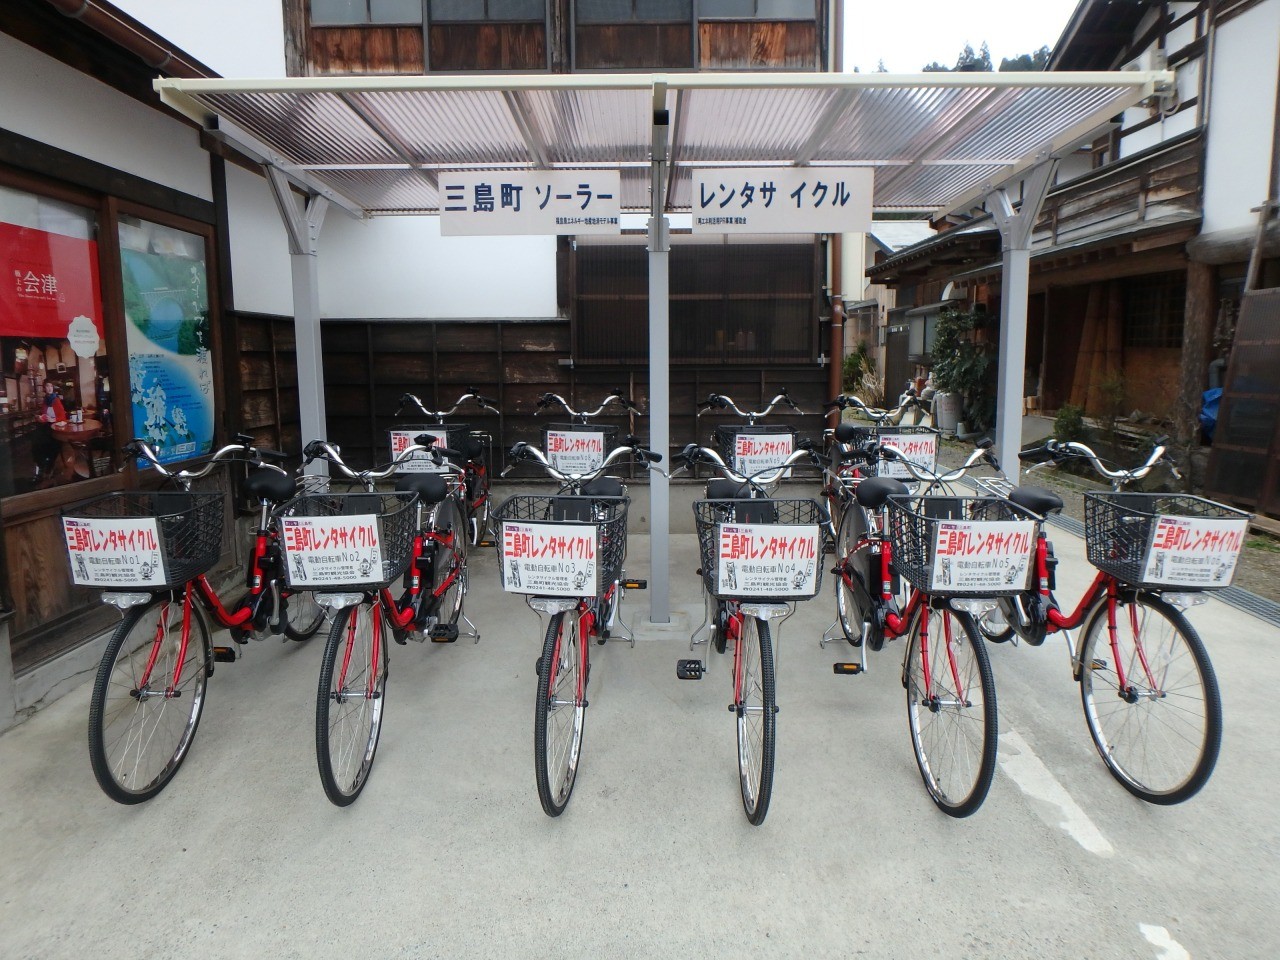 Mishima town -Cycling from a station-